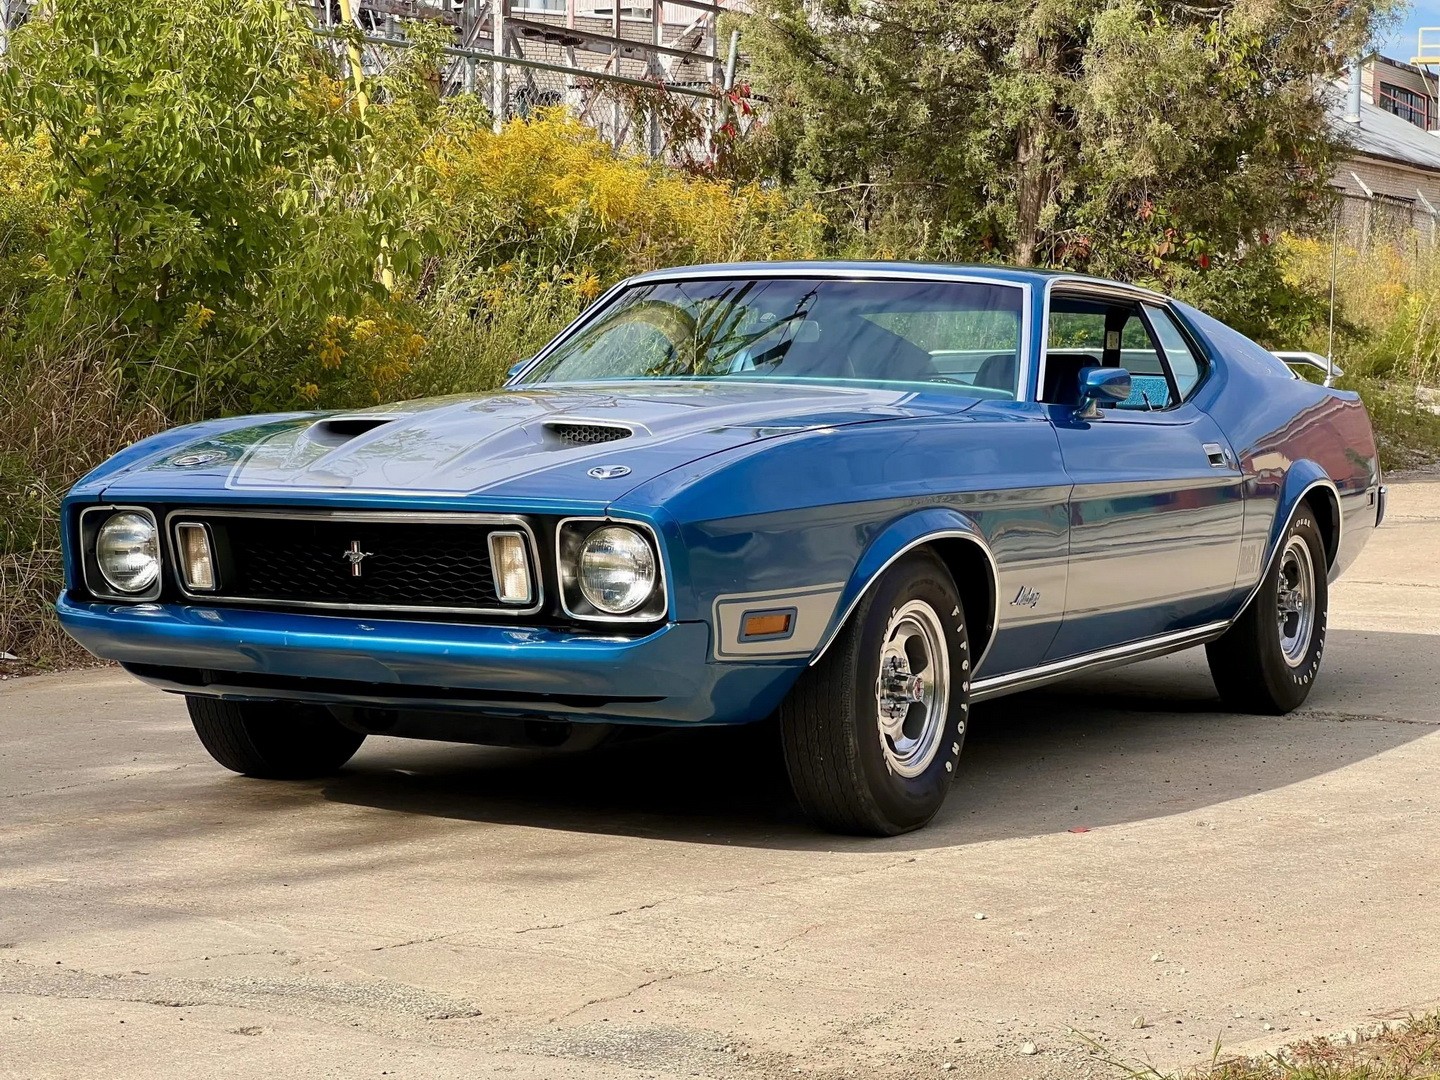 This 1973 Ford Mustang Mach 1 Slept in a Garage for 45 Years, Probably ...